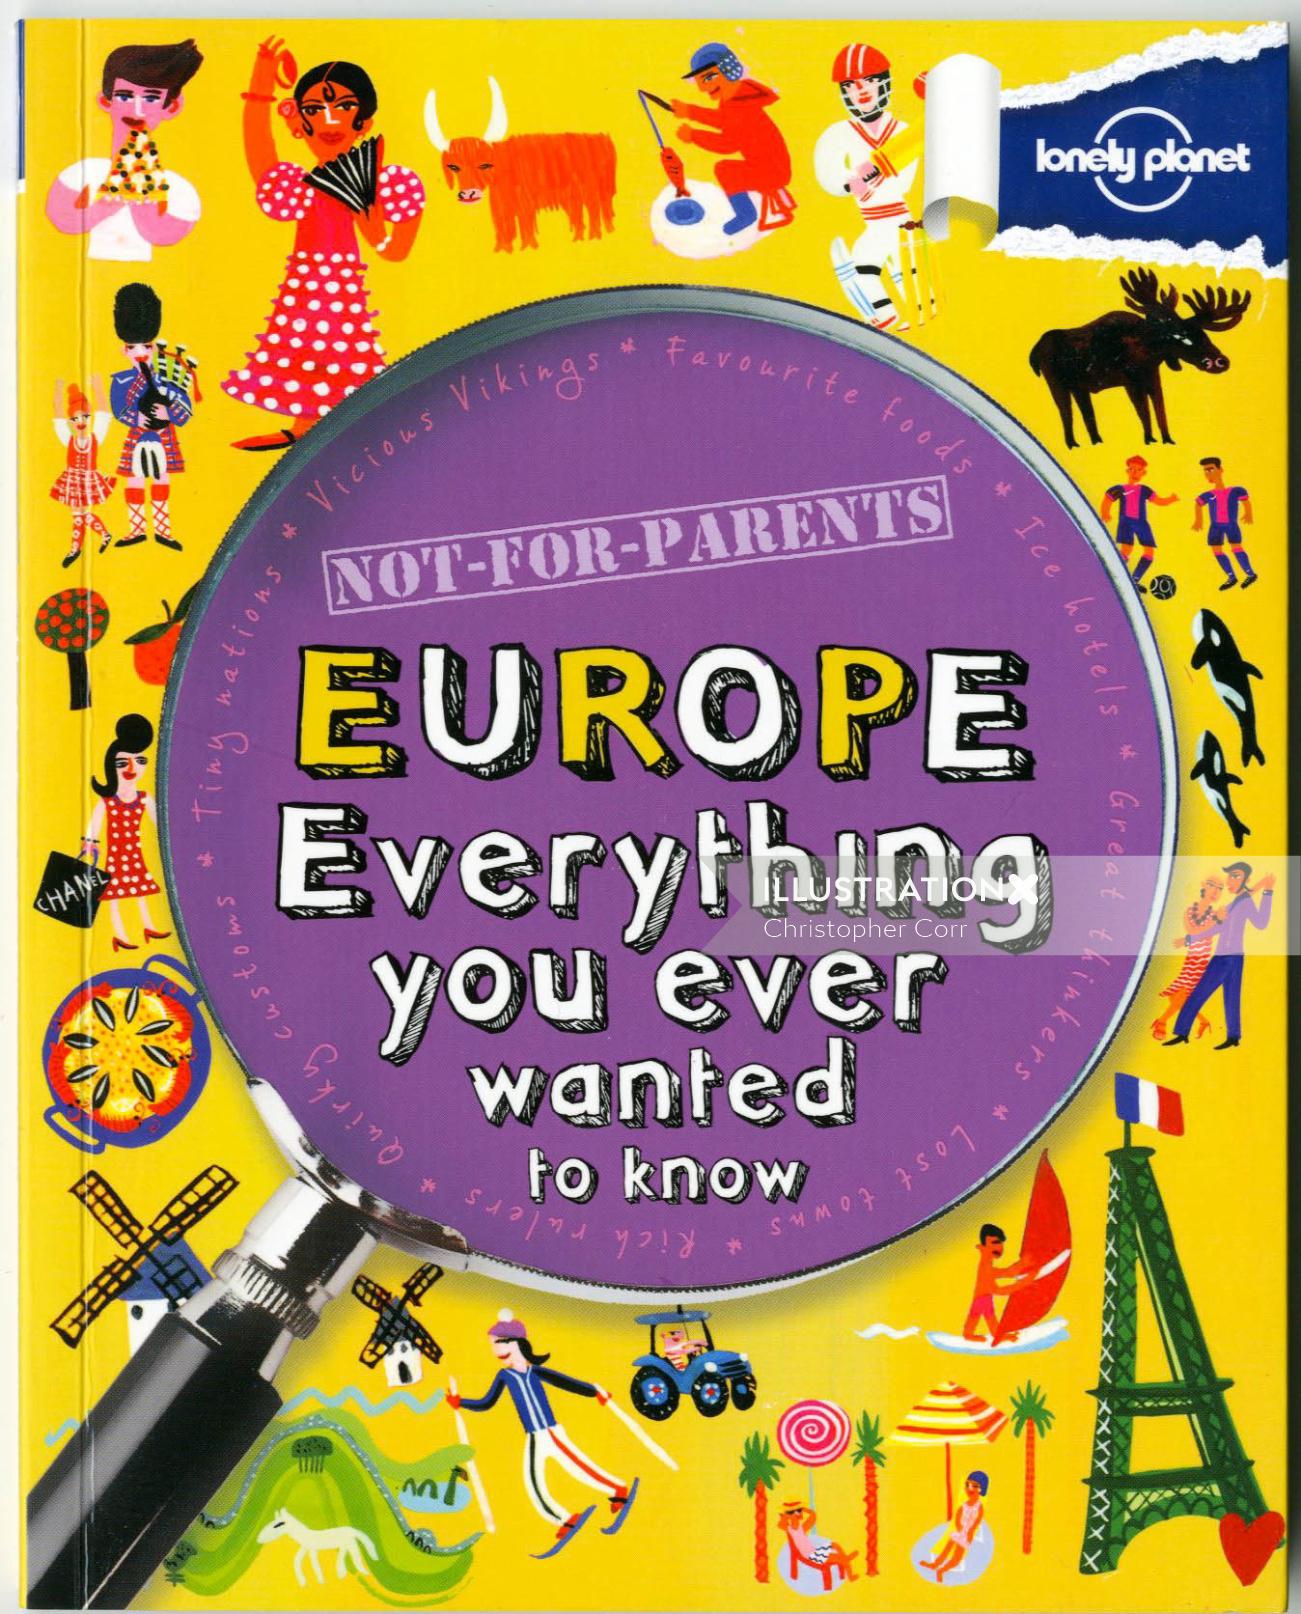 Kids book illustration of Europe everything you ever wanted to know